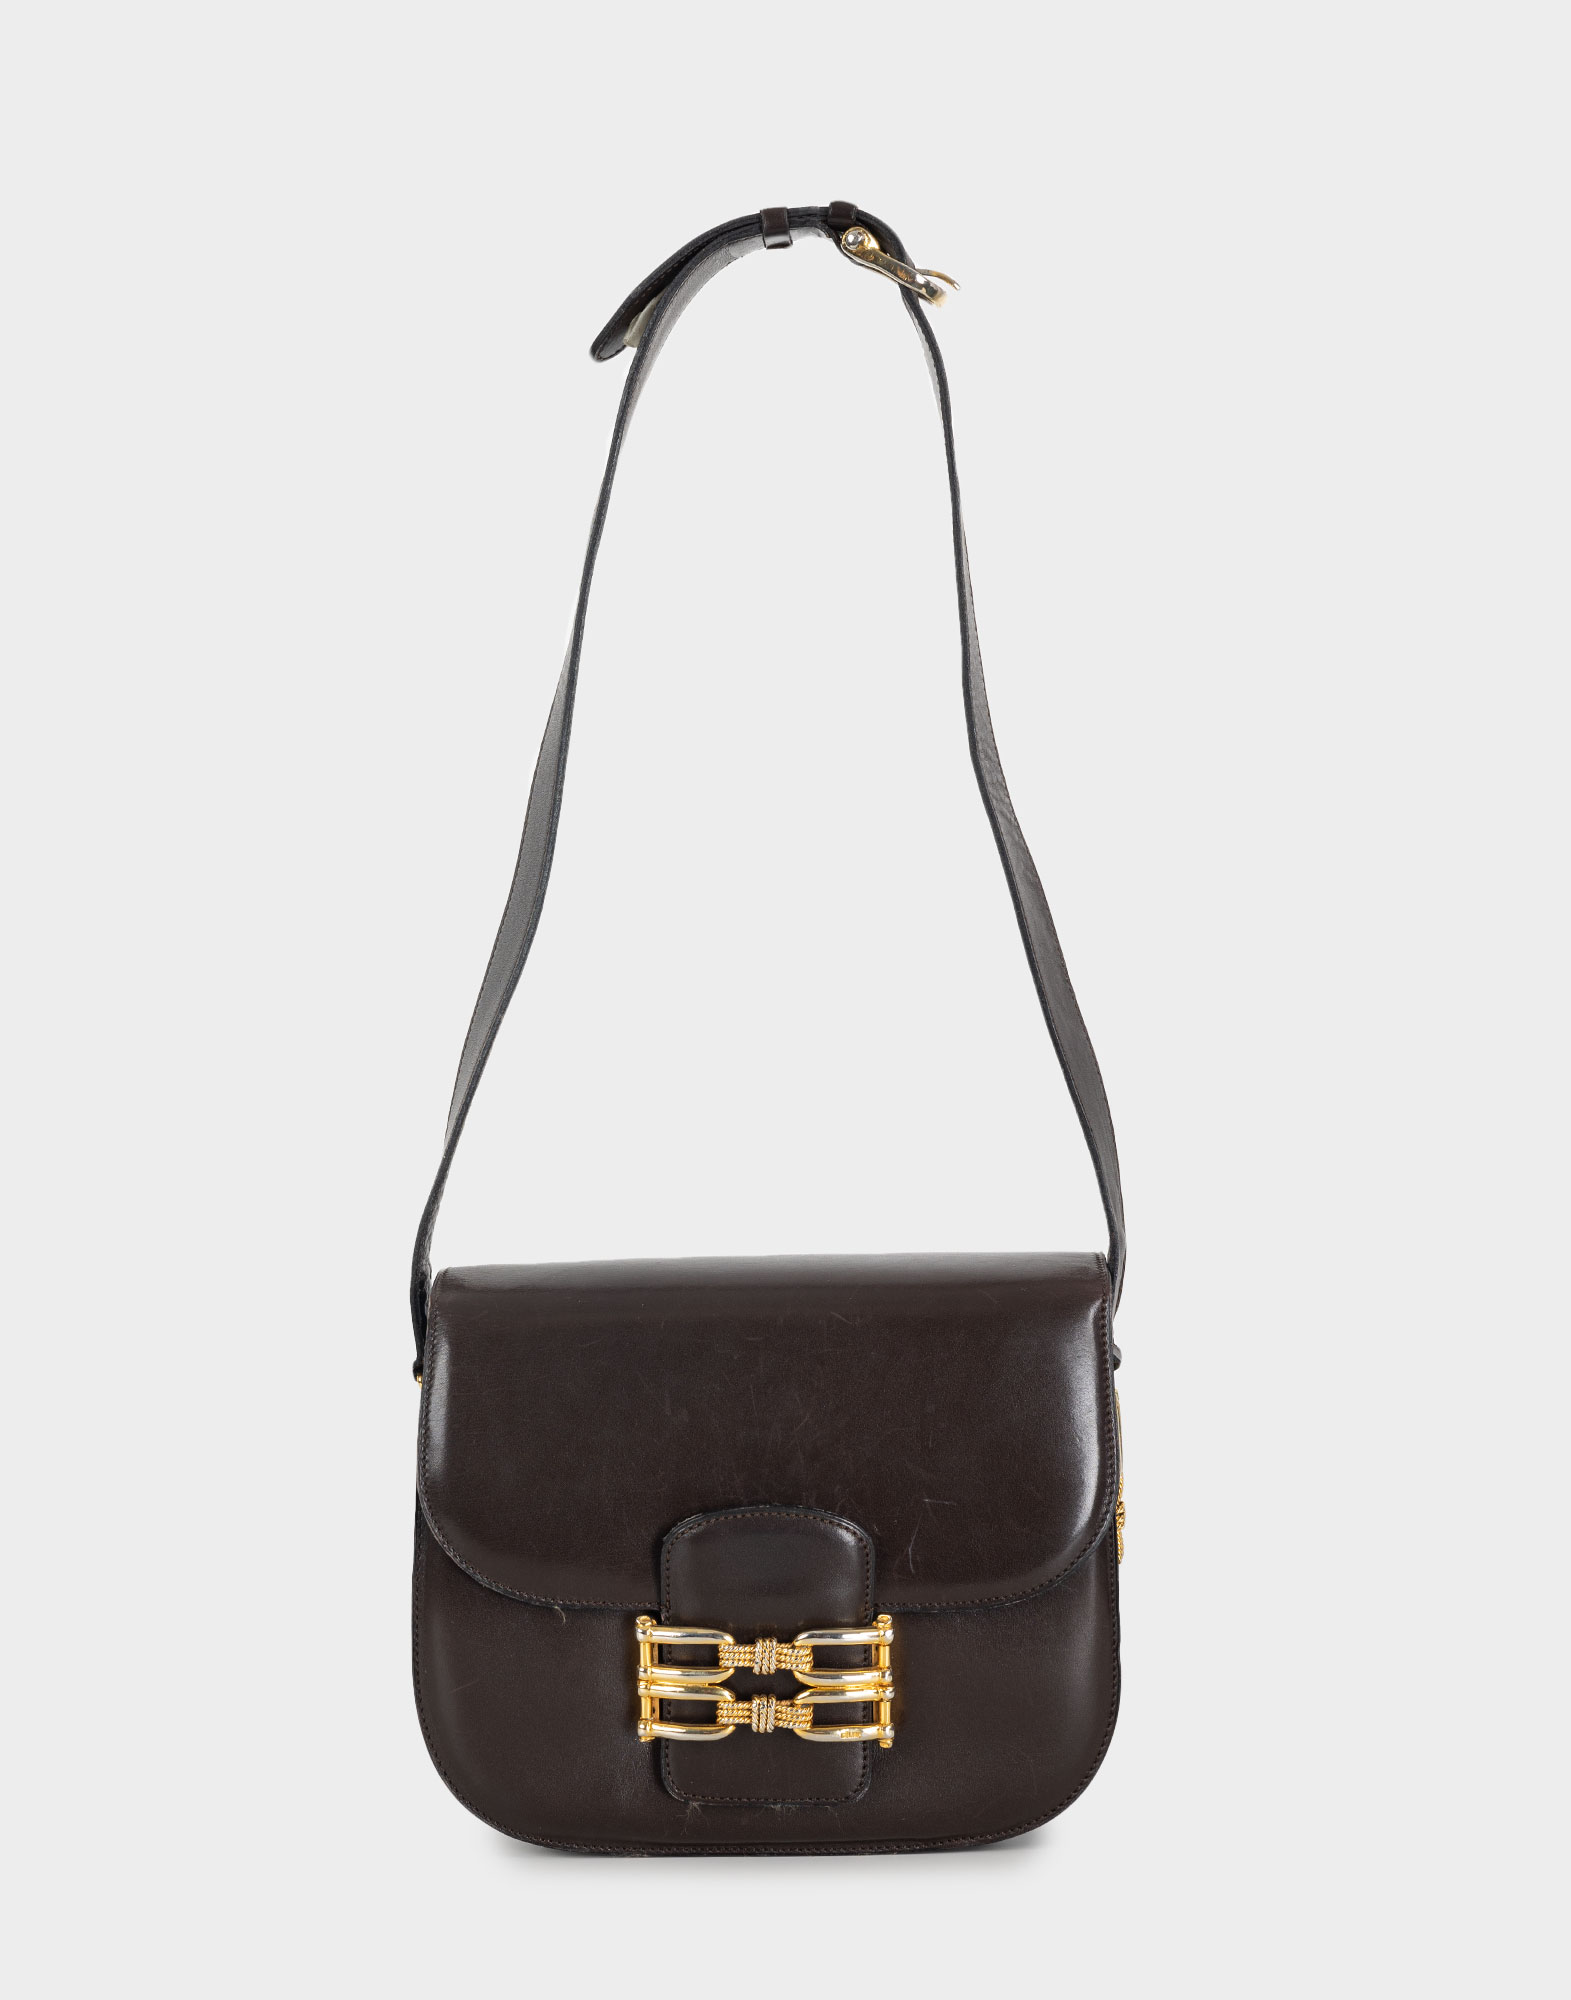 brown women's leather bag with adjustable shoulder strap, front flap closure and gold detailing